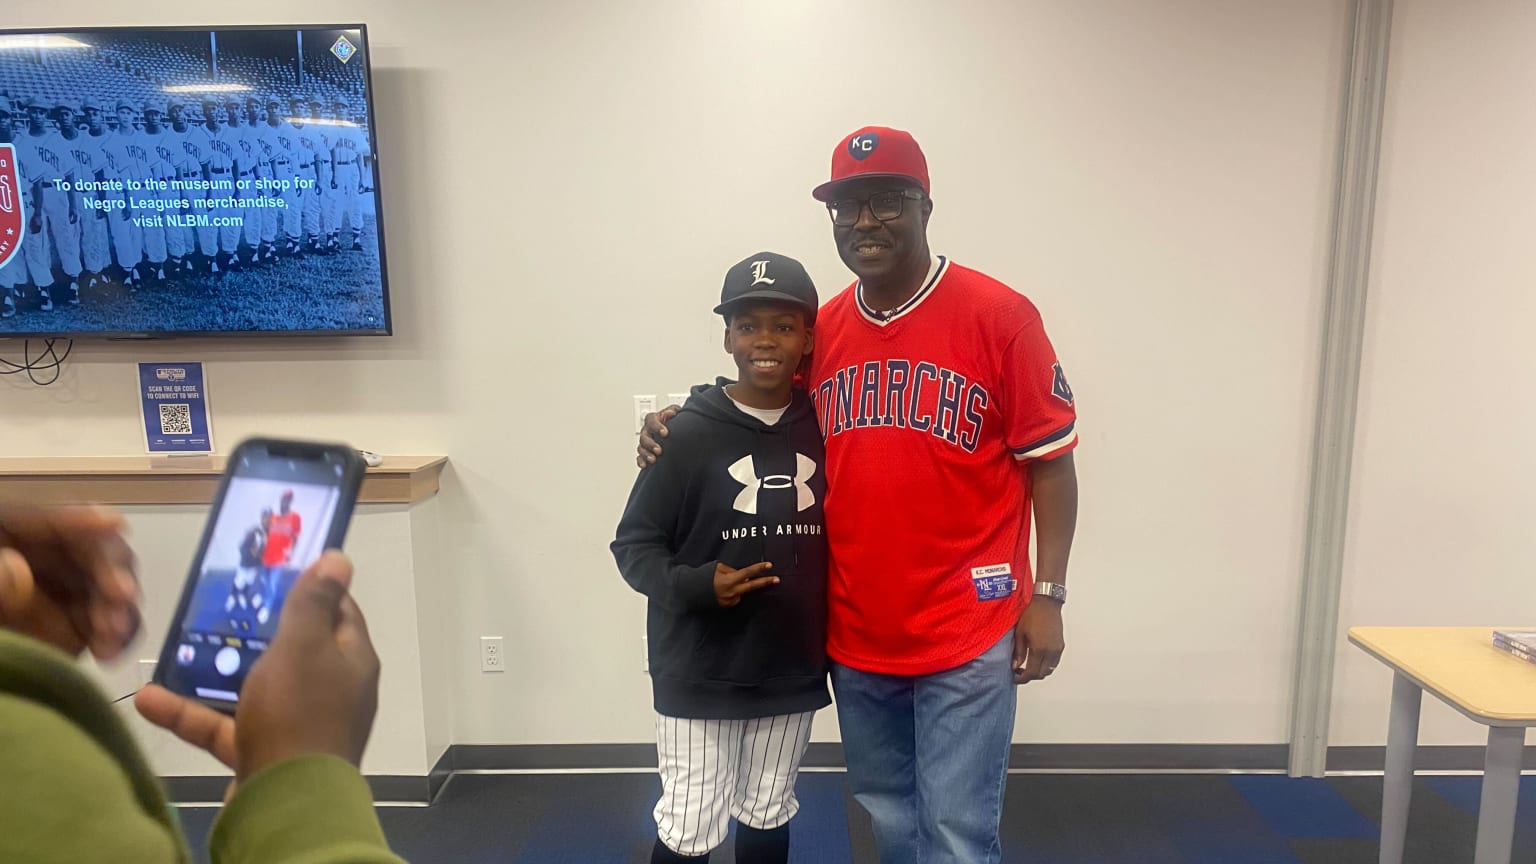 Negro Leagues Baseball Museum president Bob Kendrick poses with a youngster